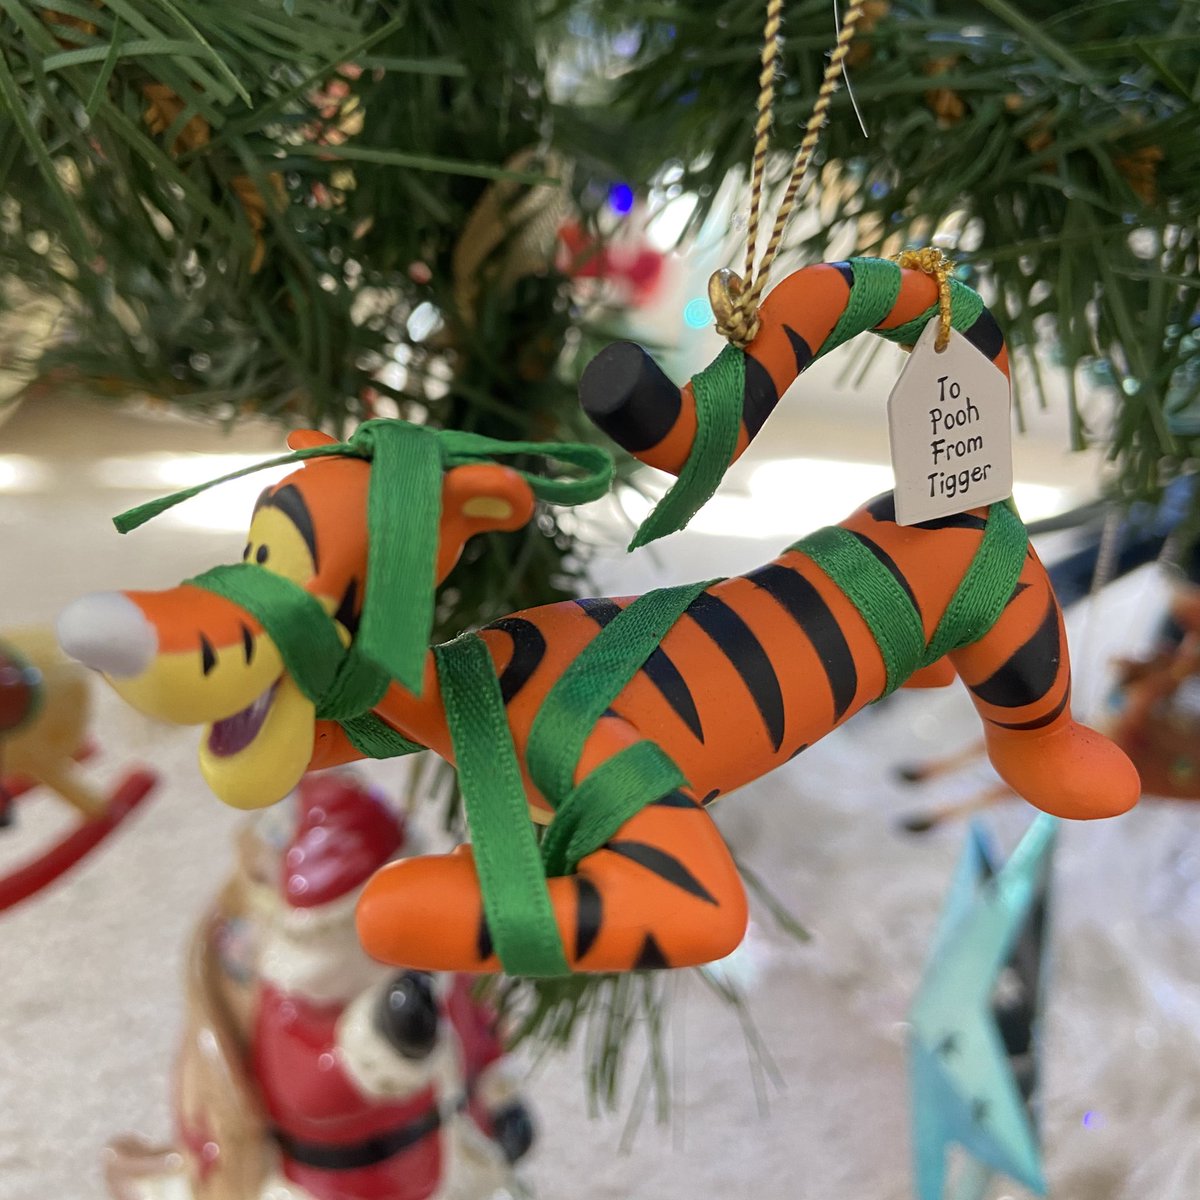 Another Disney one. This time Tigger has gift wrapped himself! 